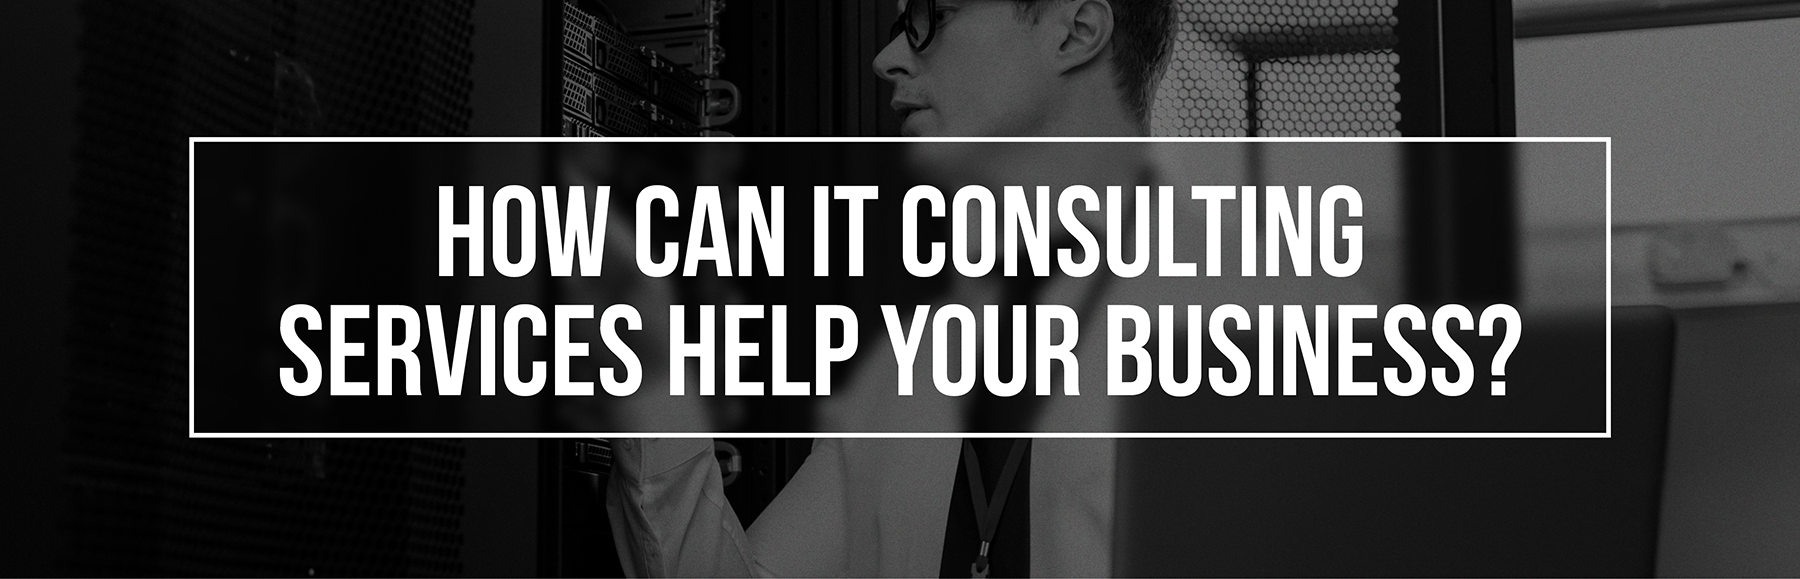 how-can-it-consulting-help